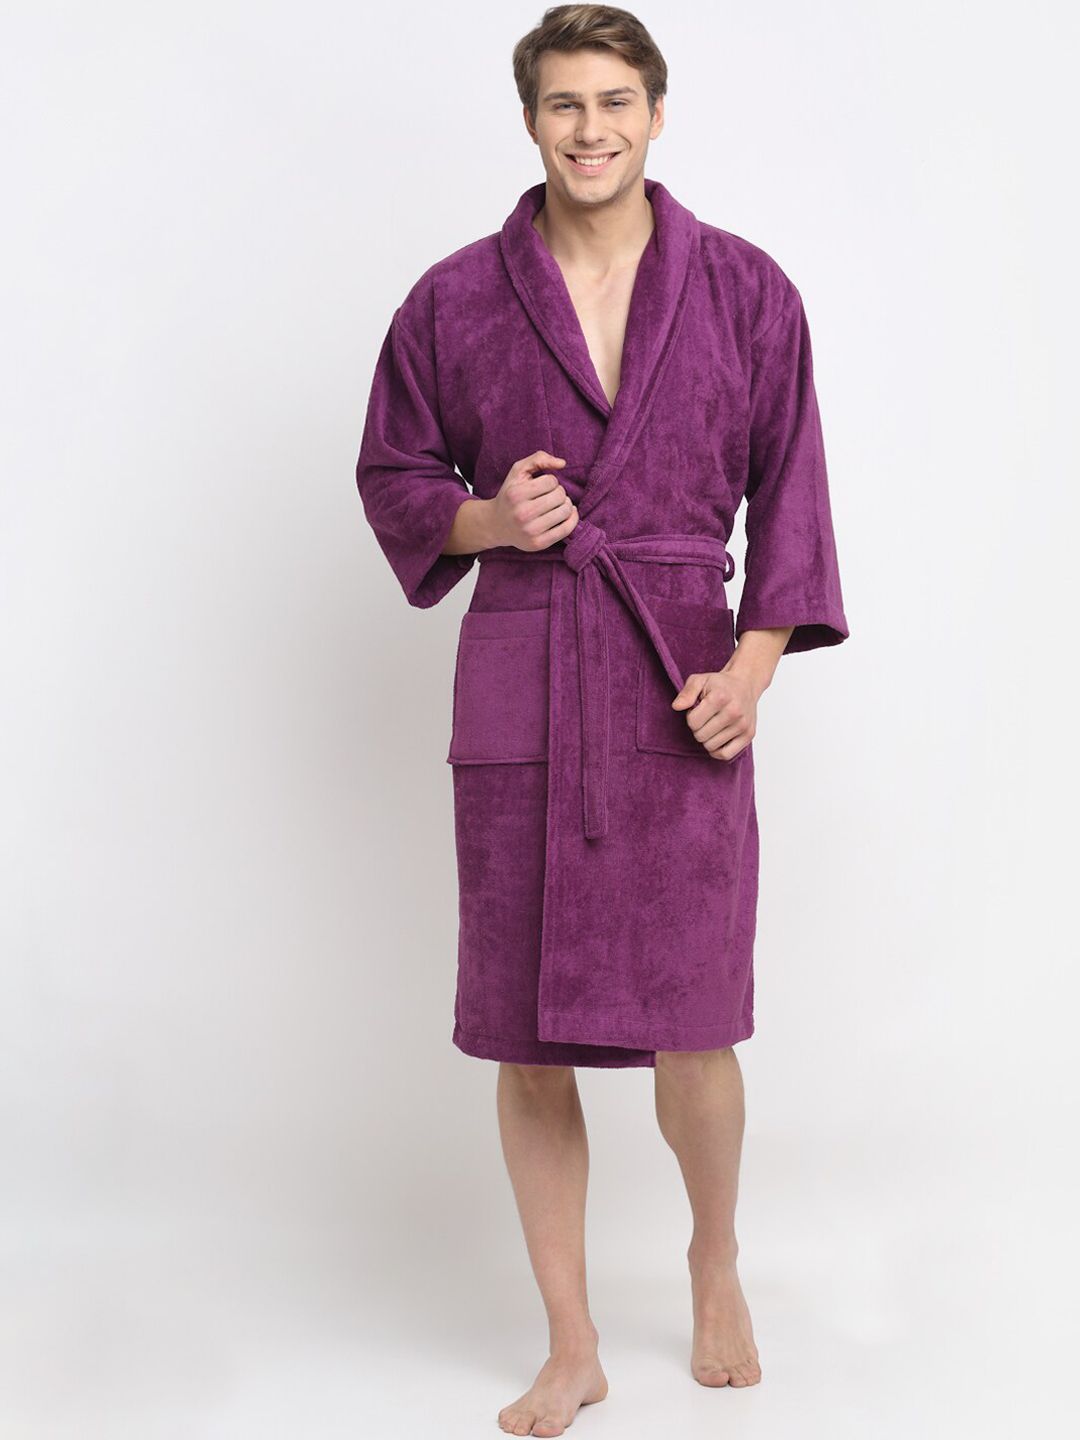 Creeva Unisex Purple Solid Terry Cotton Bath Robe With Pockets Price in India